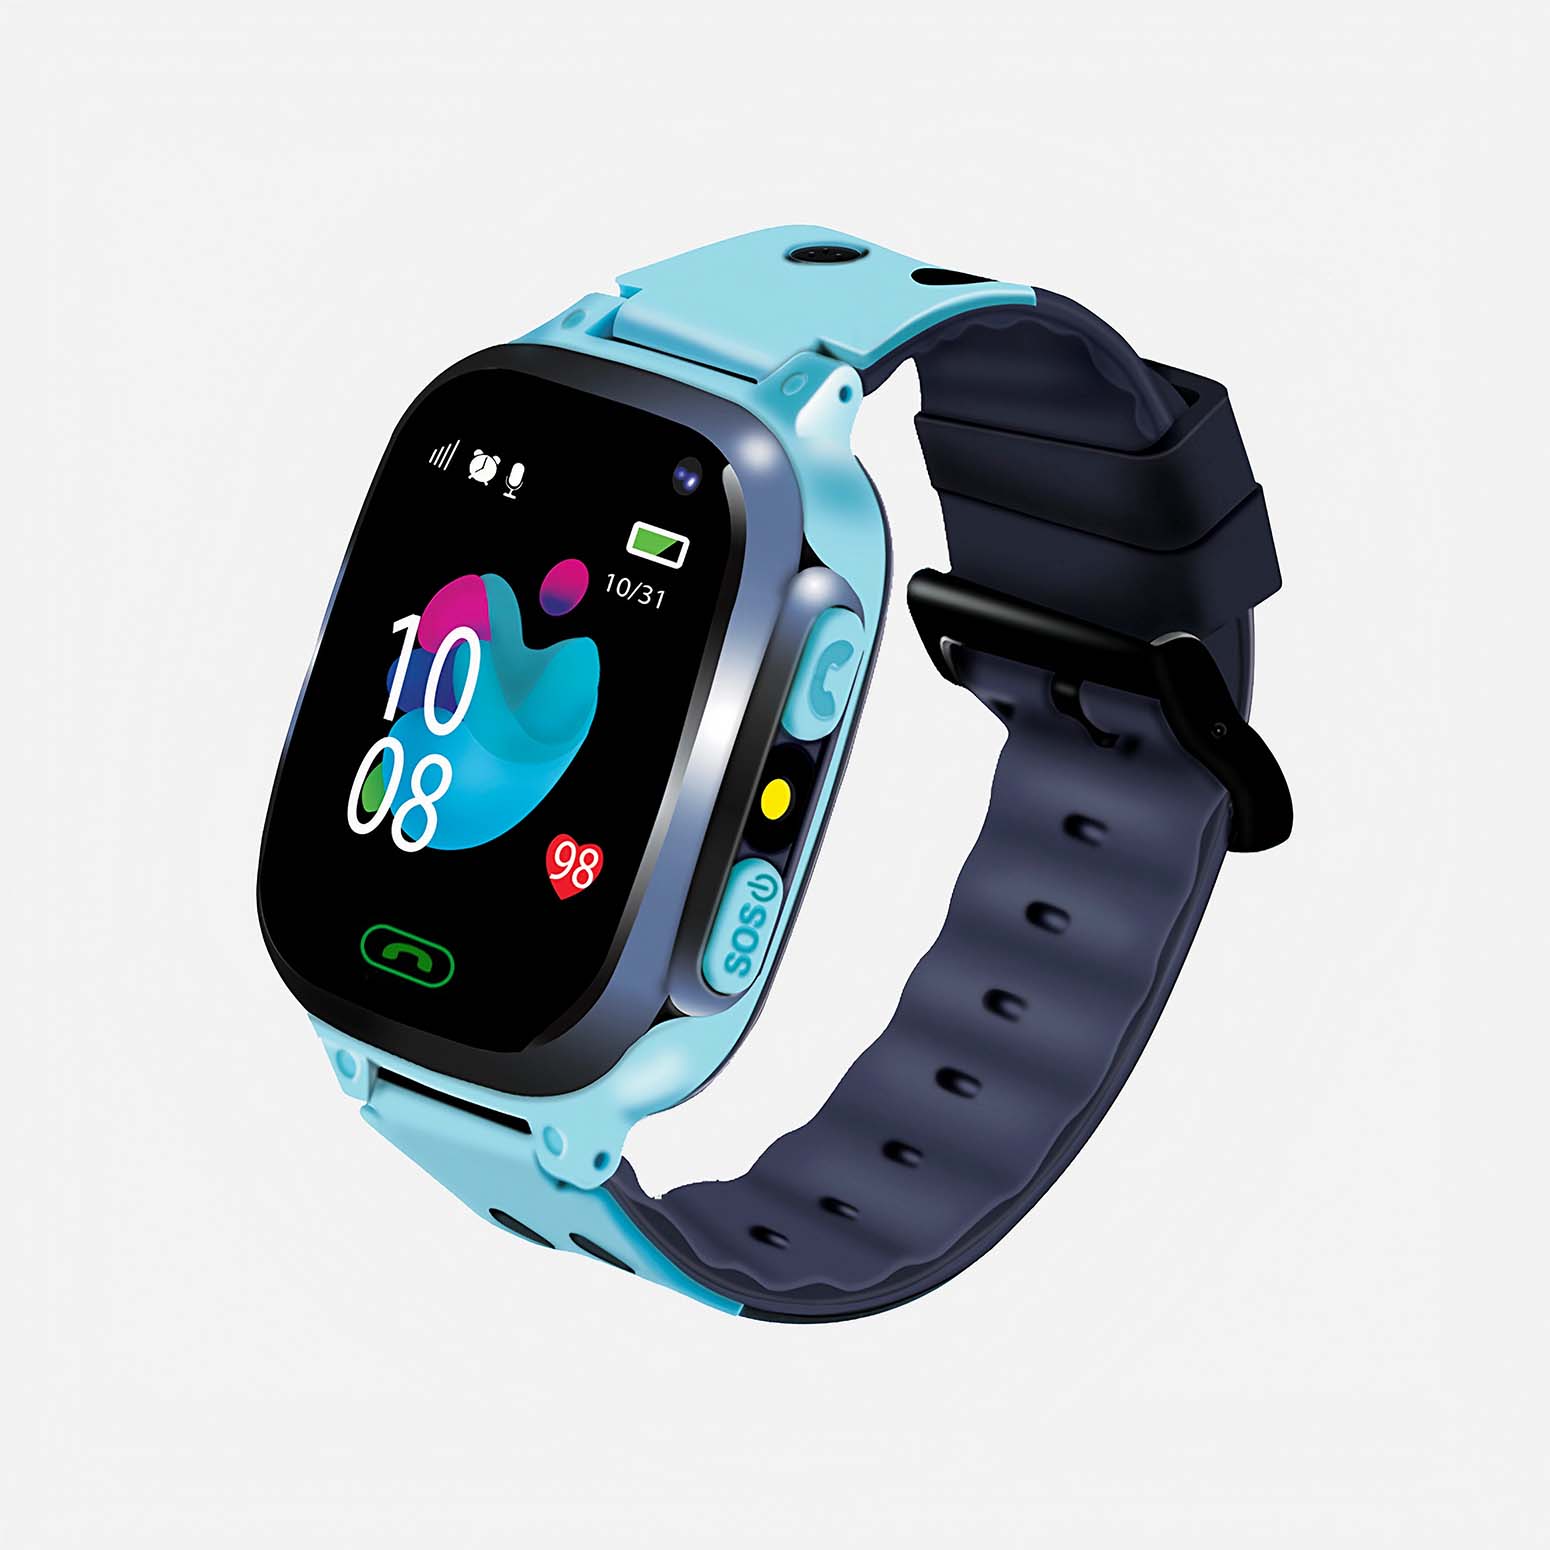 Day One for watchOS